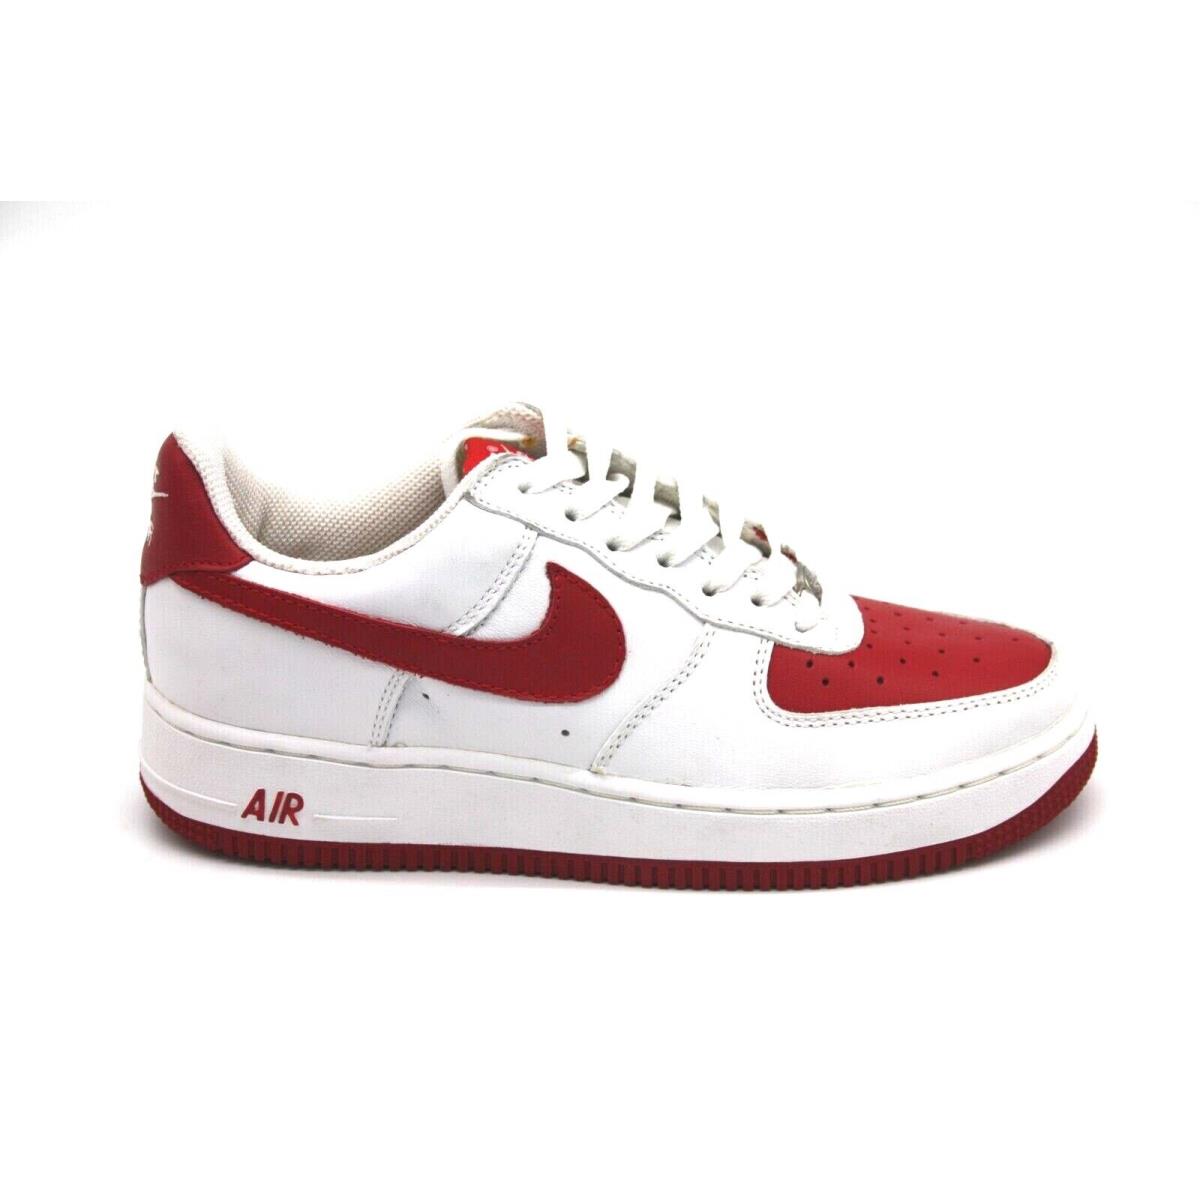 Nike Air Force 1 GS 306291-161 White/varsity Red Vintage 2005` Shoe Size 6.5